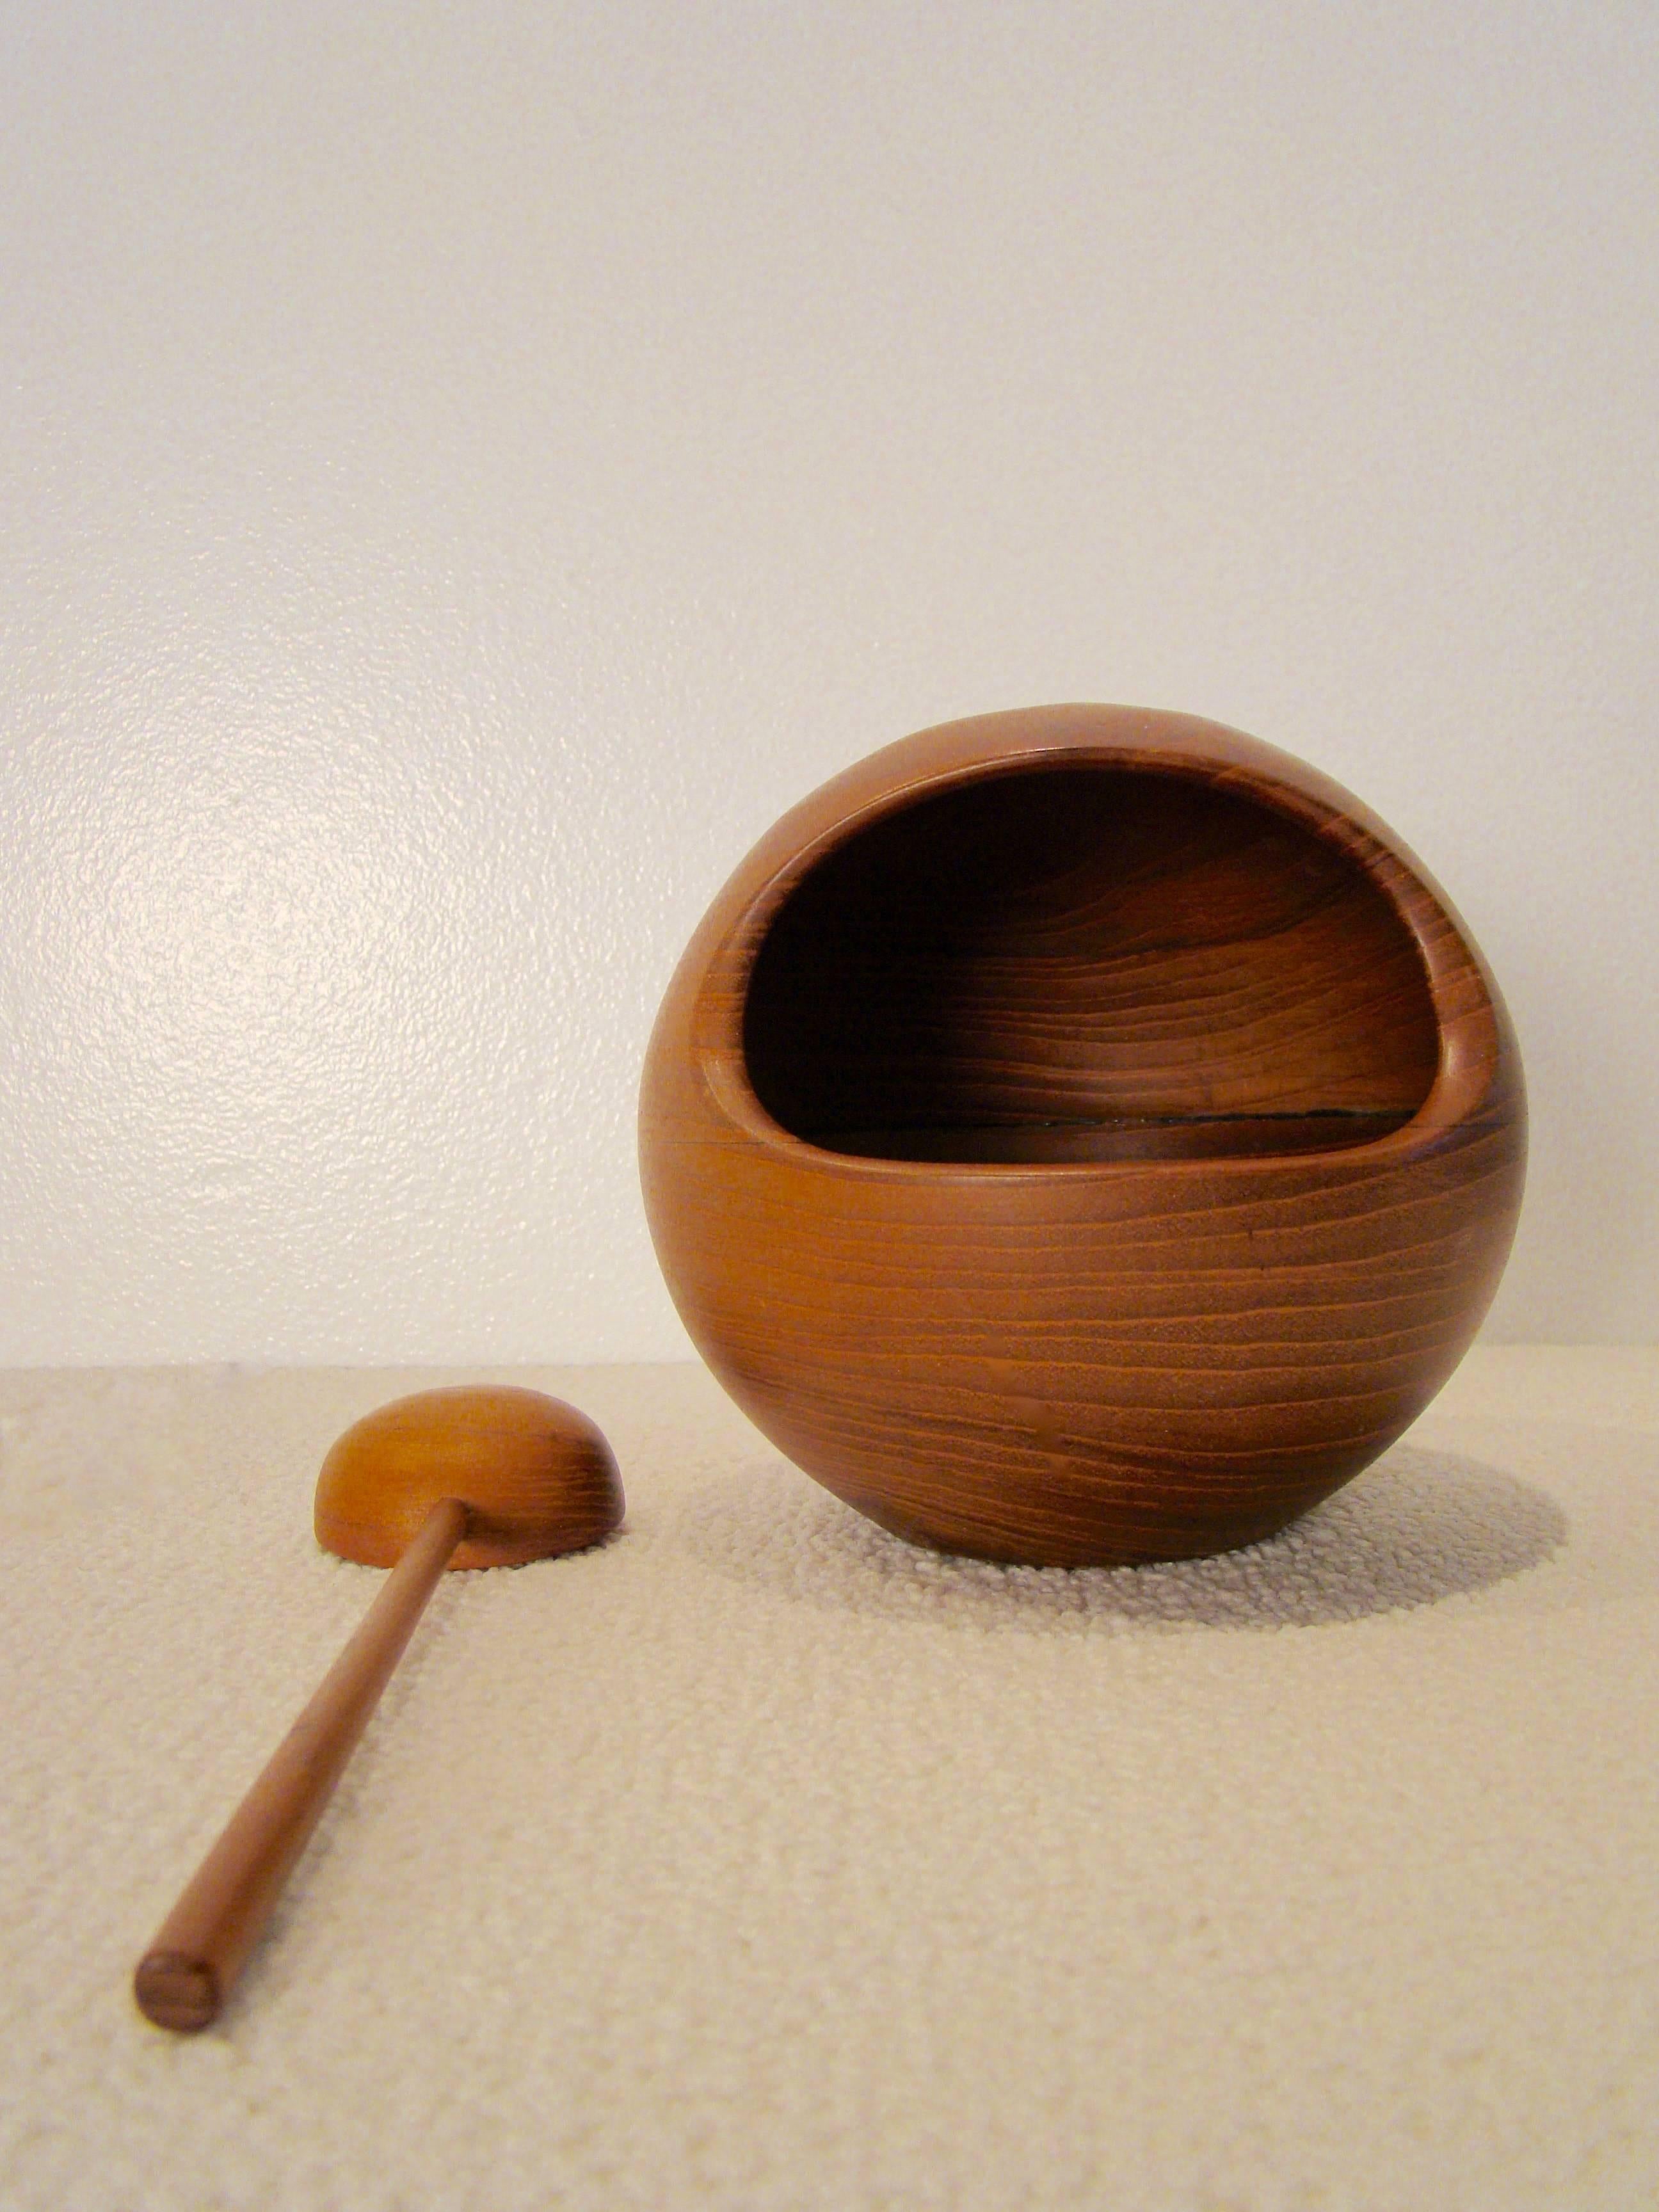 Hand-Crafted Teak Orb Nut Bowl and Serving Spoon by AB Sowe Konst, Sweden